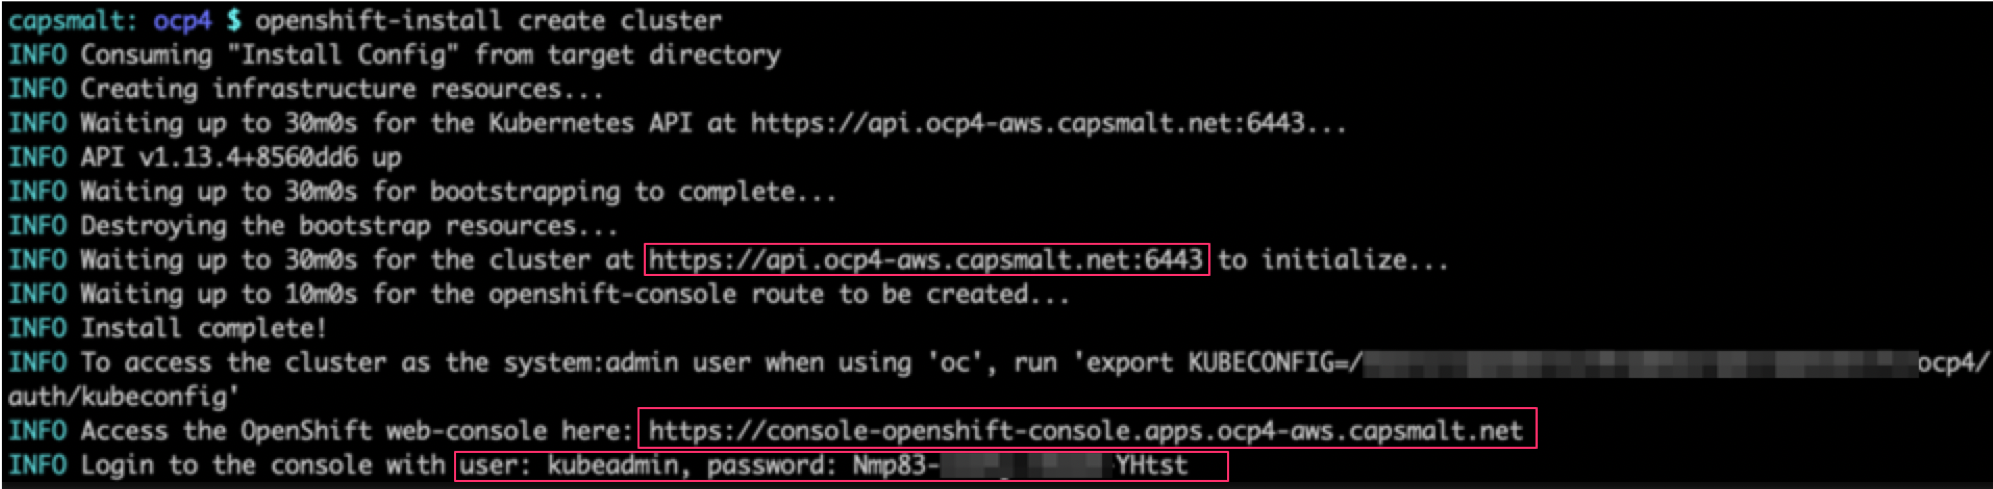 ocp4-openshift-install_create_cluster_result.png